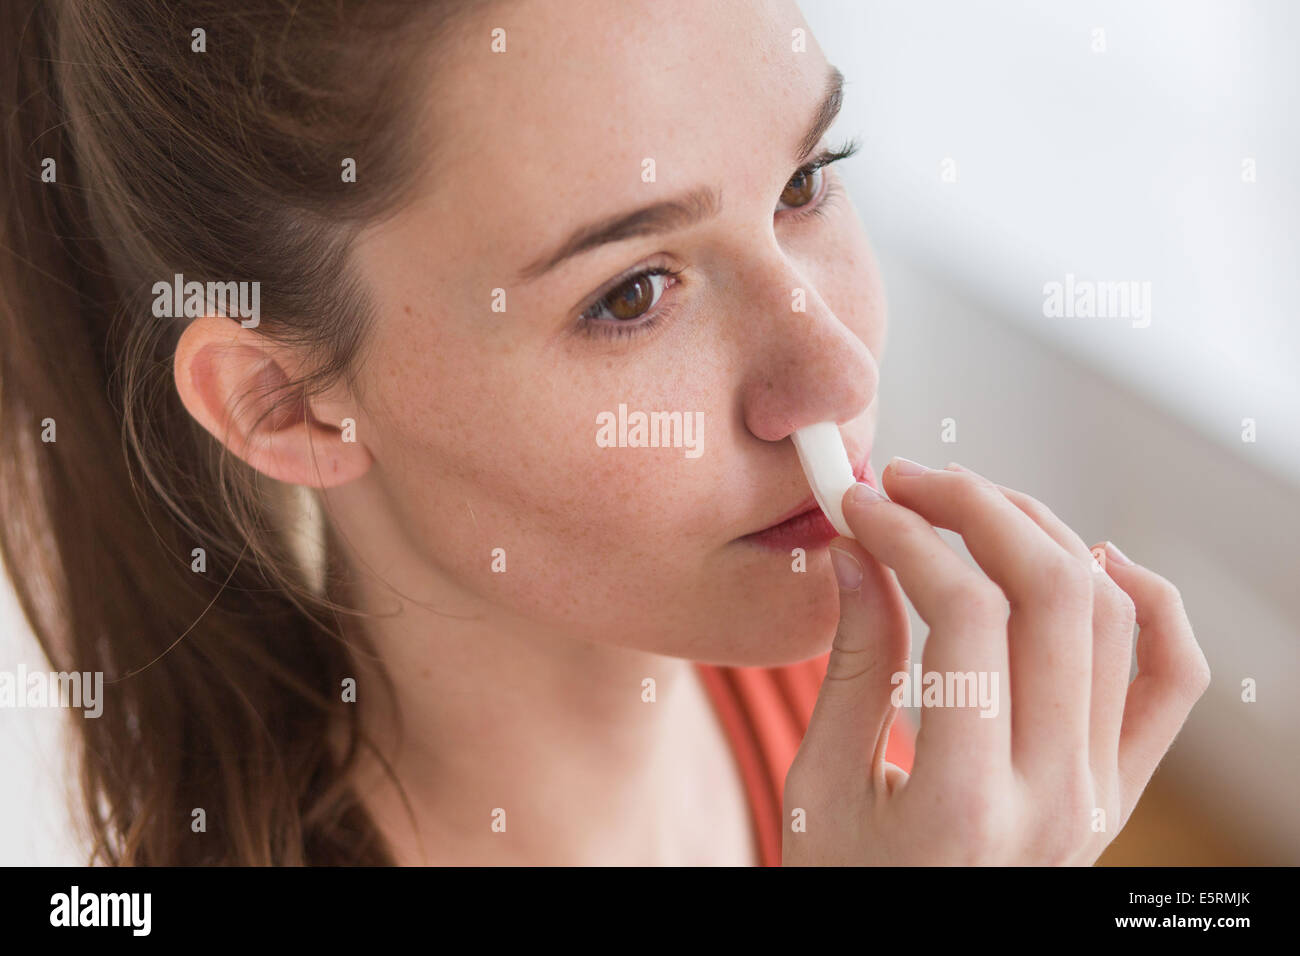 Woman using a sterile gauze soaked in hydrogen peroxide to stop a nosebleed. Stock Photo